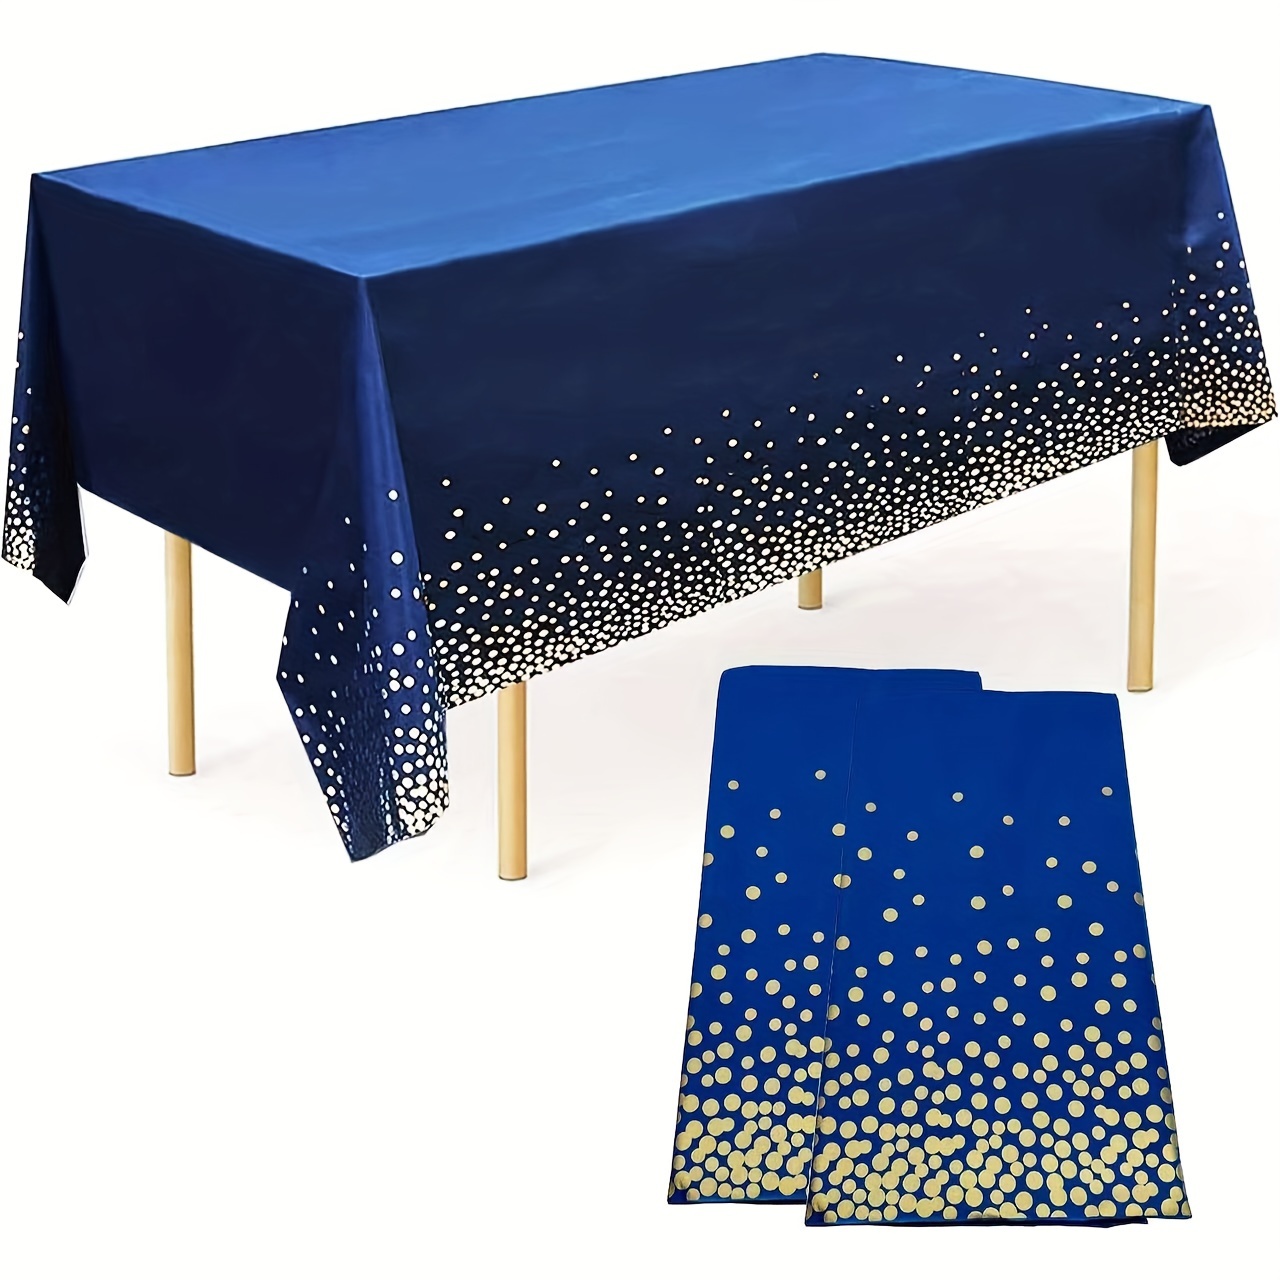 

2 Pack, Blue And Golden Plastic Tablecloth, 54 Inch X108 Inch Rectangular Disposable Dot Party Table Cover, Suitable For Birthday, Graduation, Restaurant, Wedding Decoration Tablecloth